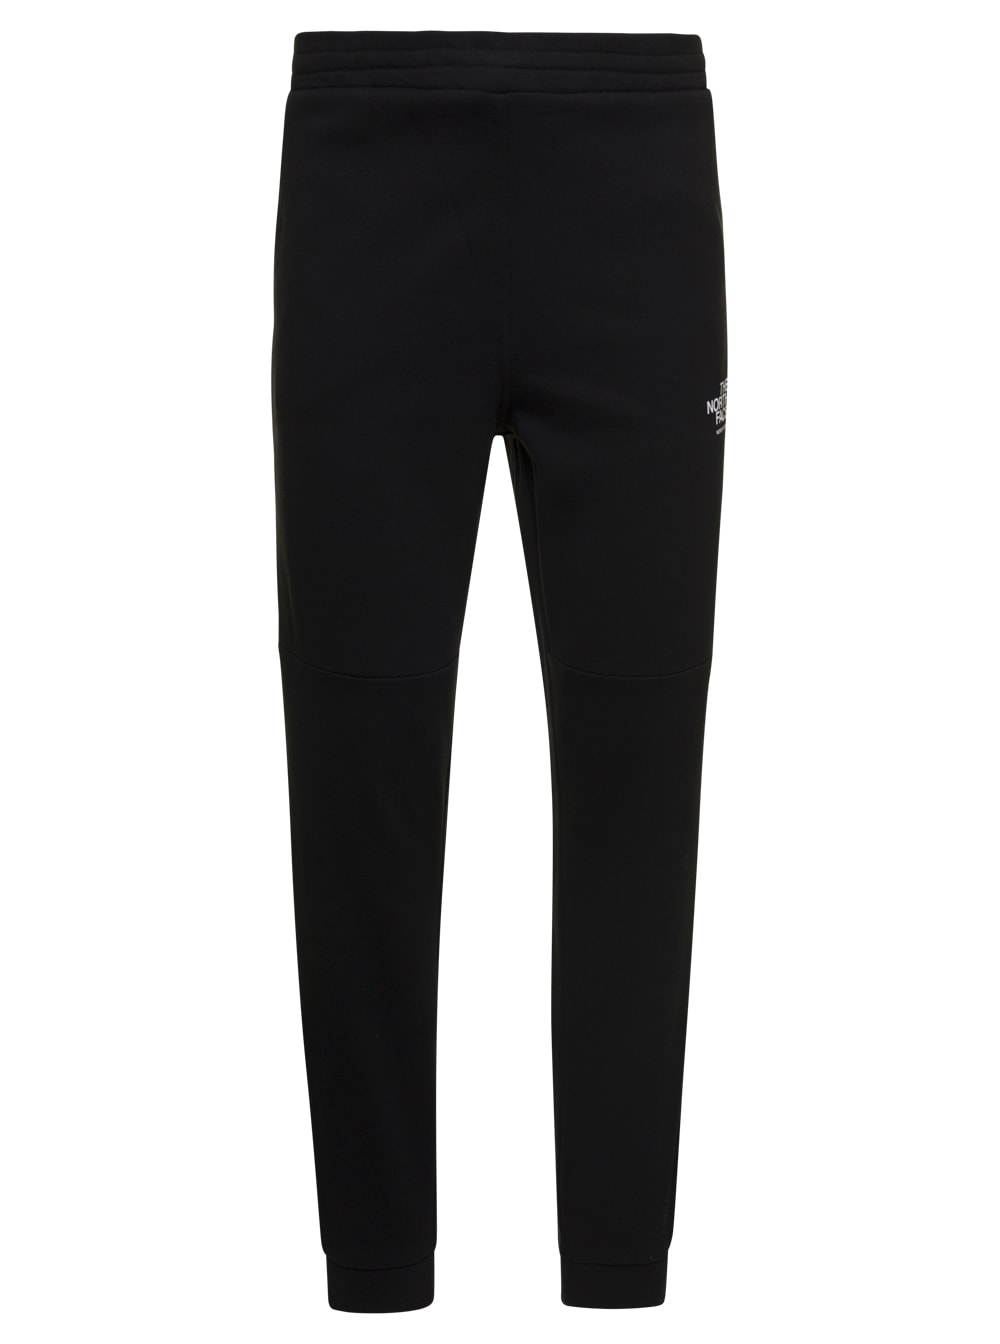 THE NORTH FACE BLACK LOGO JOGGERS IN COTTON MAN THE NORTH FACE